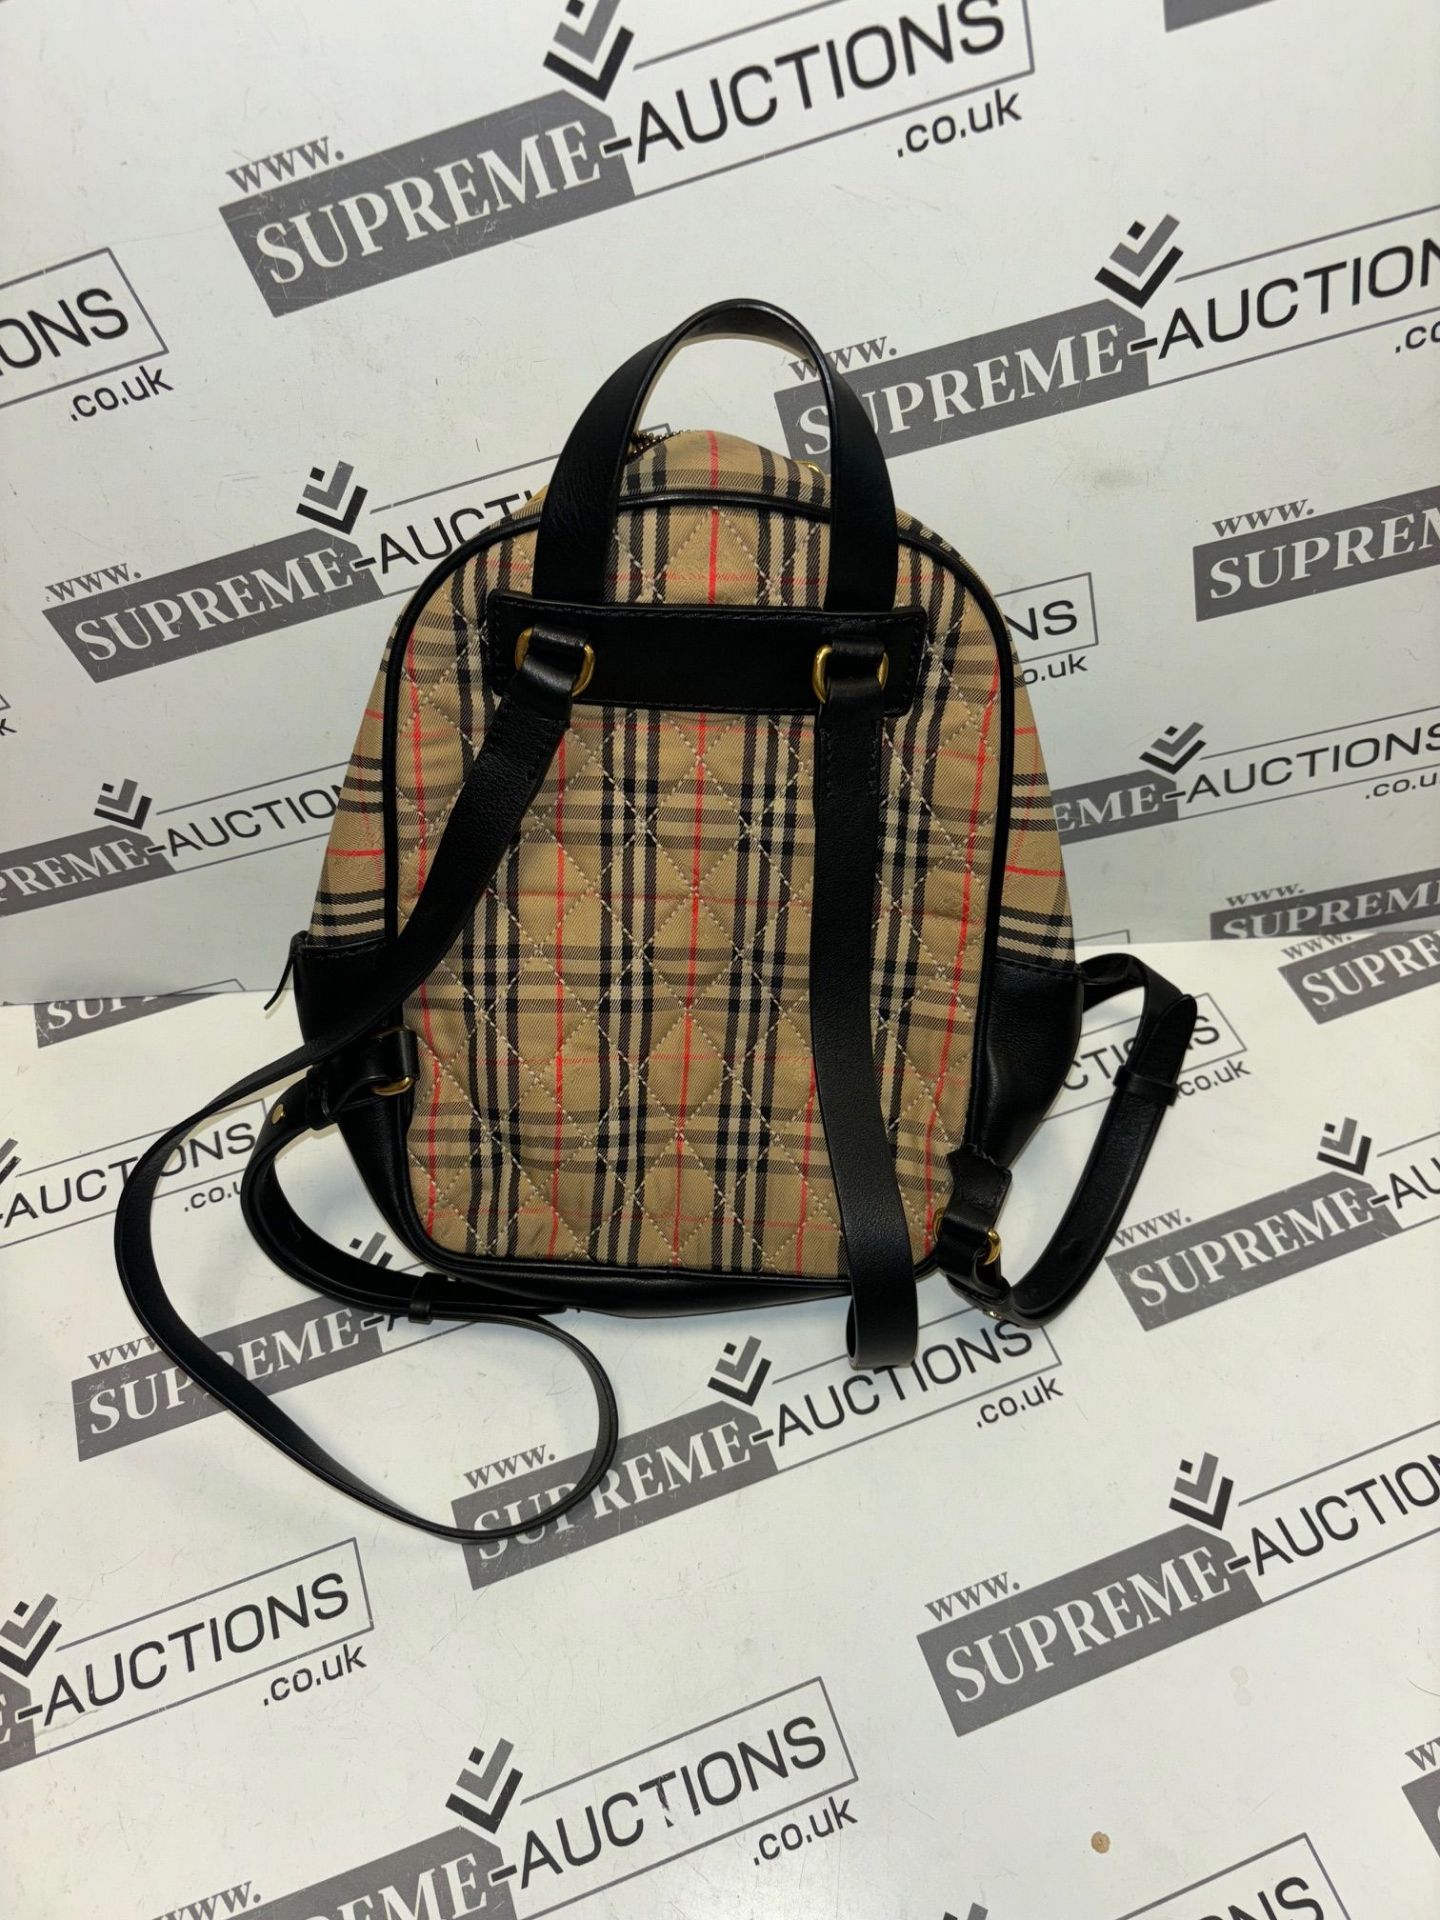 Burberry Link Backpack in Nova Check. 20x25cm. - Image 6 of 10